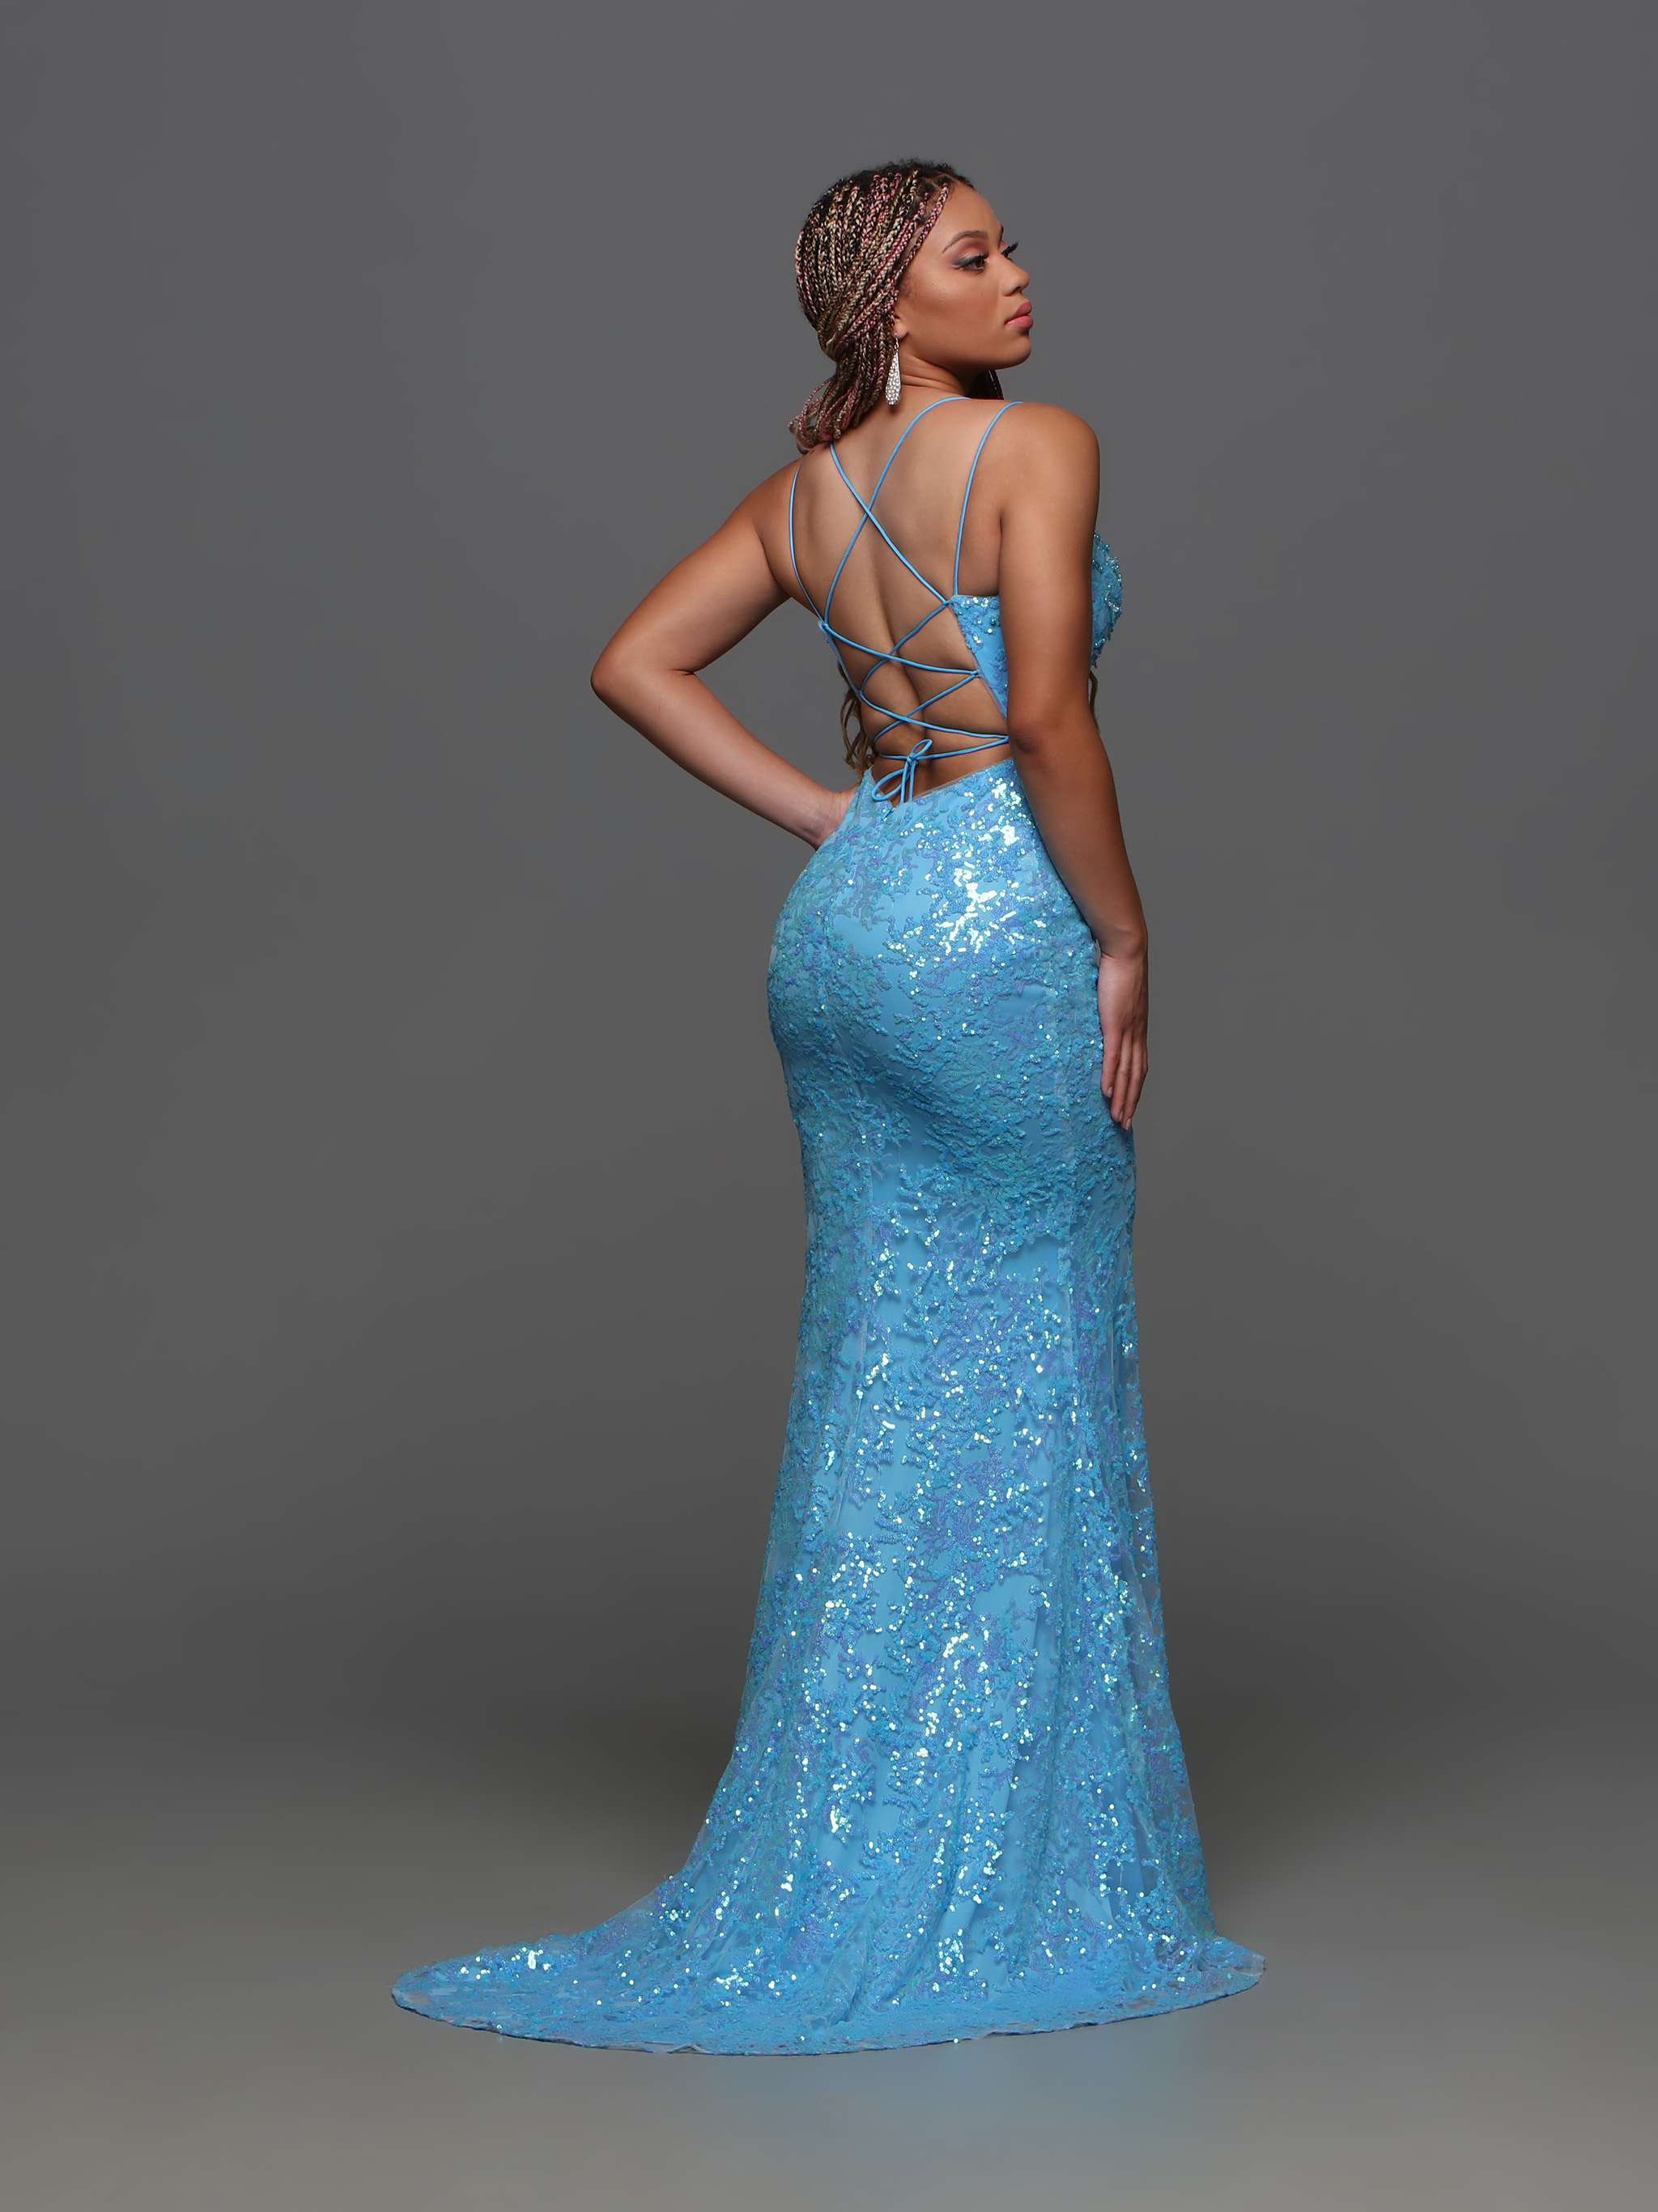 Image showing back view of style #72369